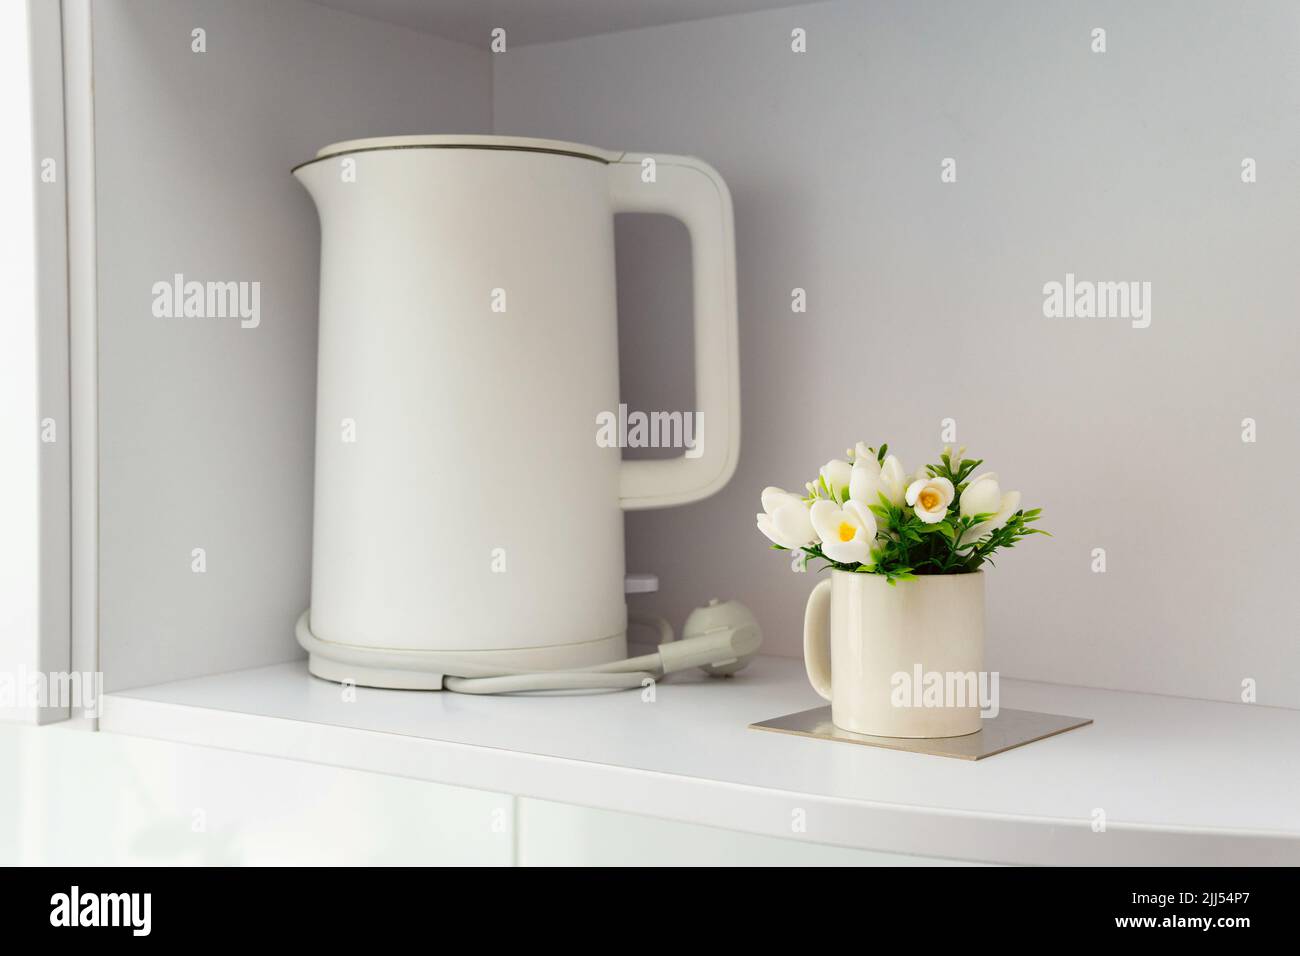 Cozy kitchen interior in Scandinavian style. White matte electric kettle and decorative flower on the shelf. Stock Photo